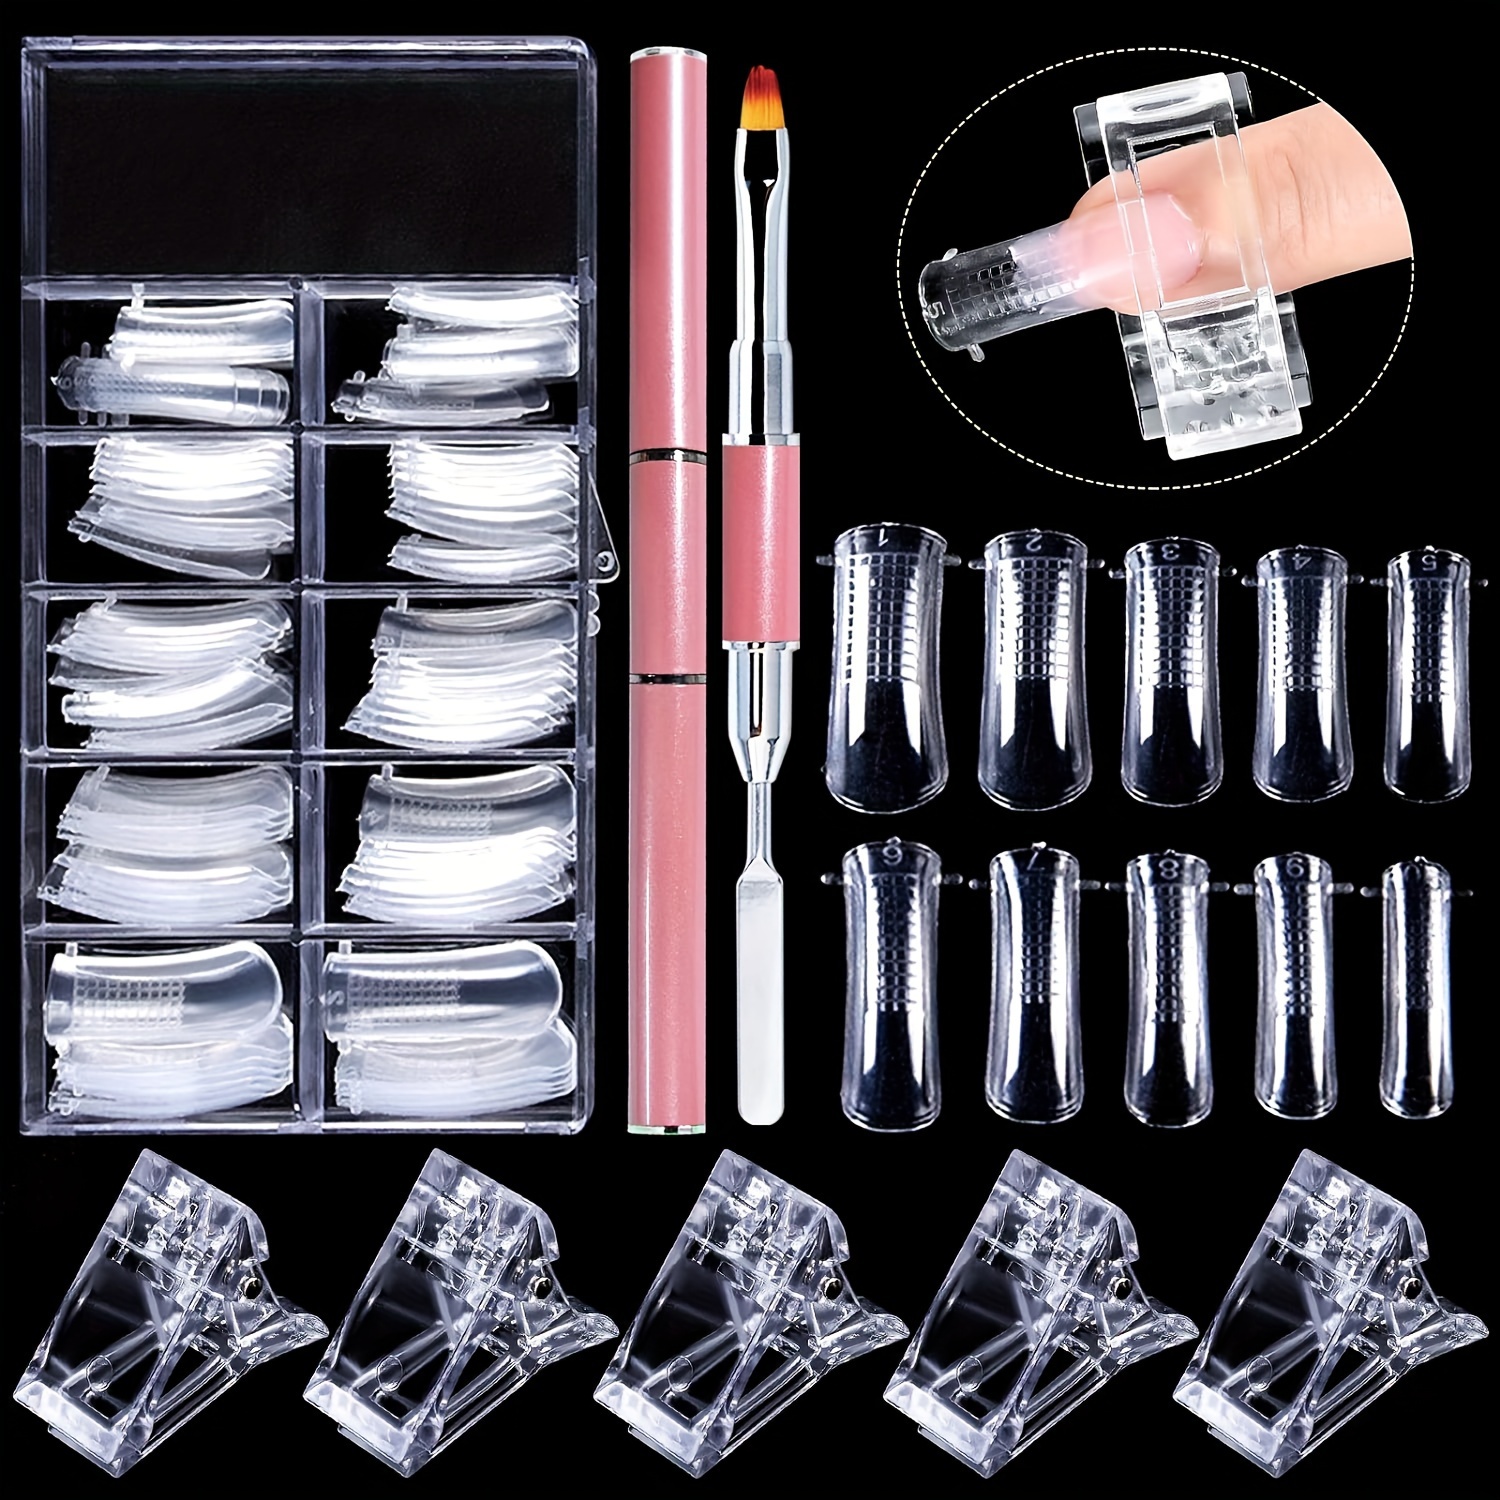 

Clear Nail Extension Form Tips Set, Dual Nail Mold Full Cover Uv Gel Tools, Acrylic Nail System Forms Set With Dual-ended Gel Brush & Picker Nail Clips